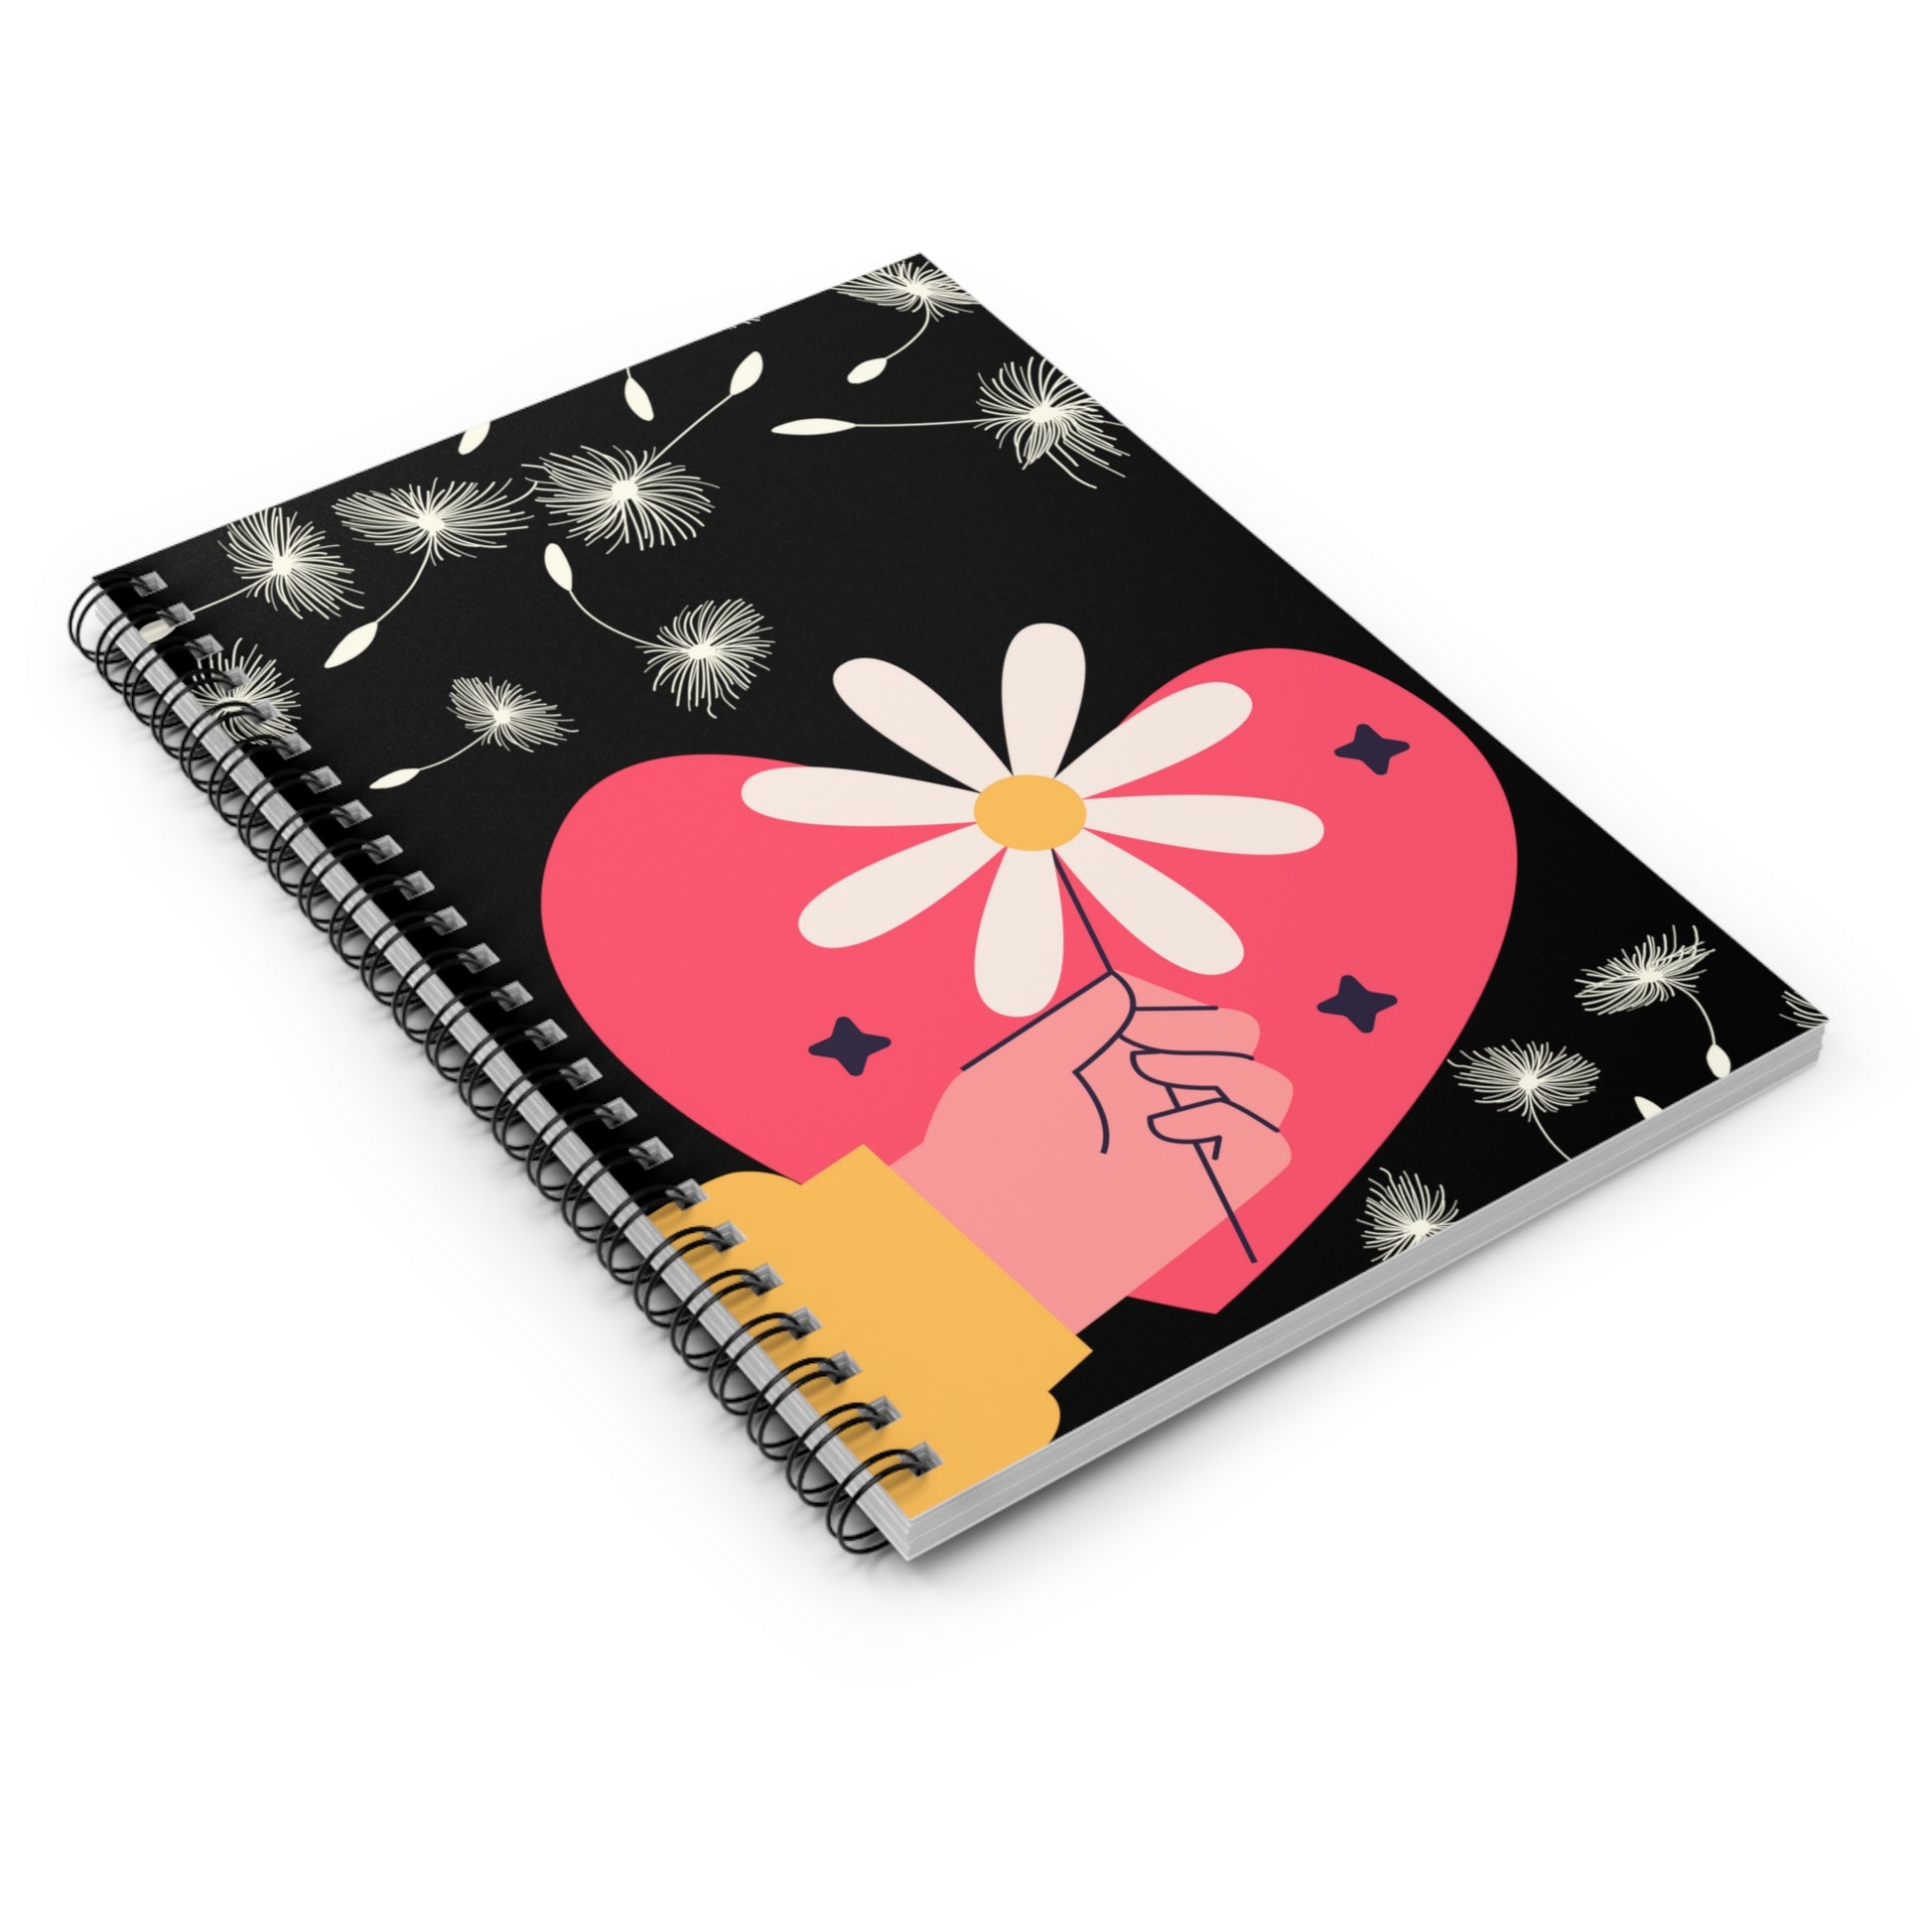 Daisy Heart: Spiral Notebook - Log Books - Journals - Diaries - and More Custom Printed by TheGlassyLass.com